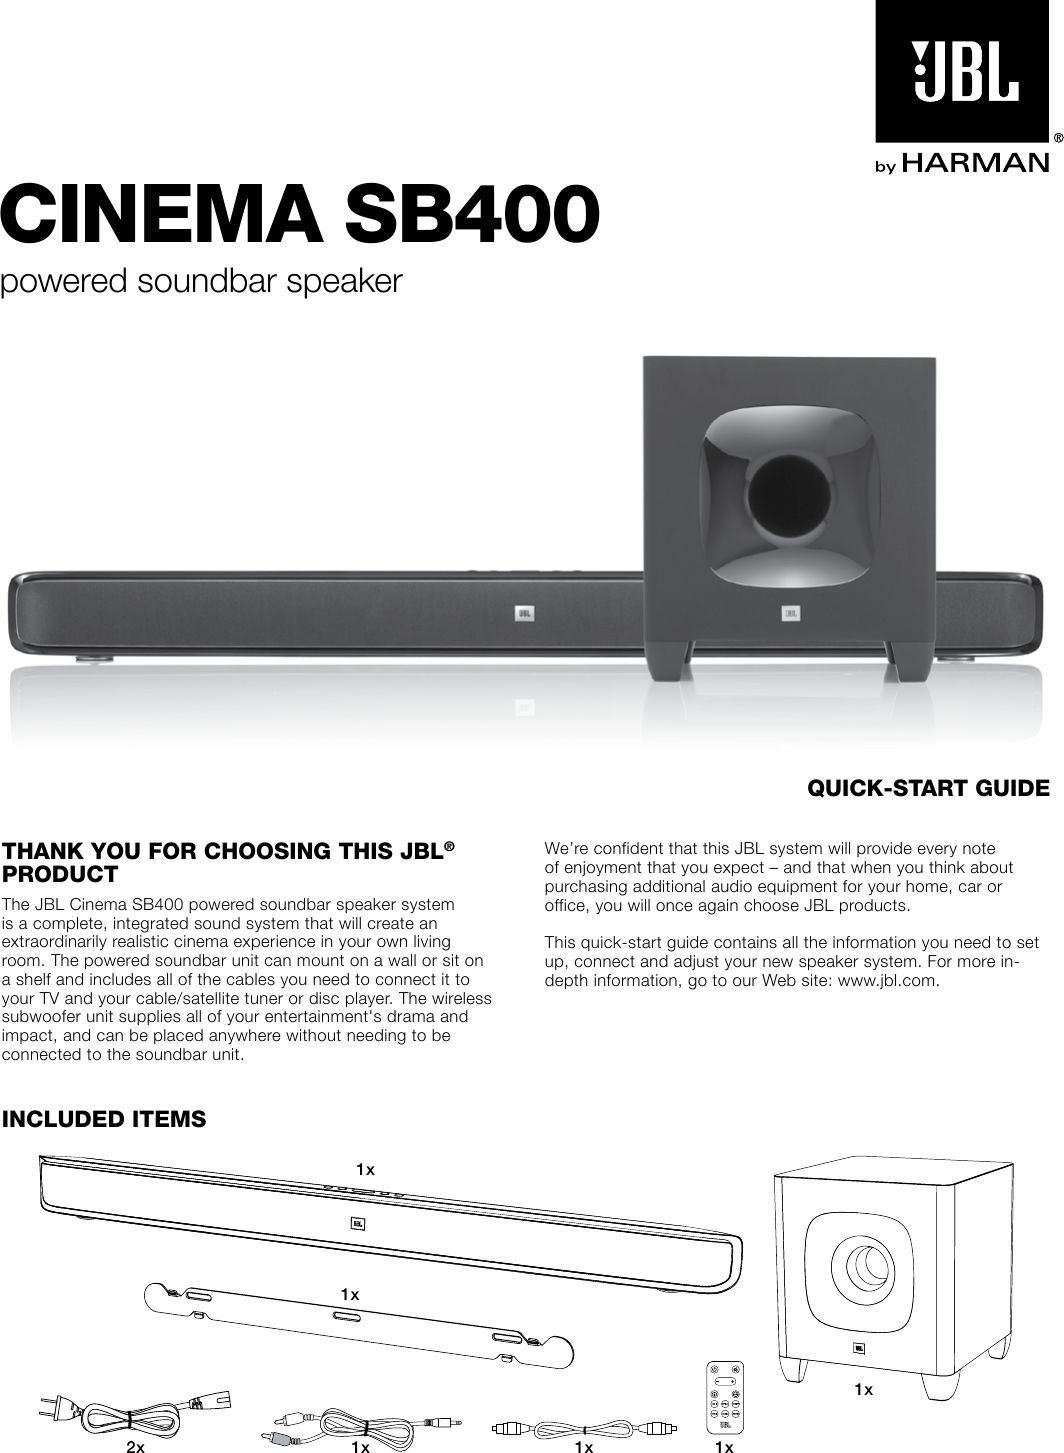 CINEMA SB400powered soundbar speakerThANk You For ChooSINg ThIS JBL® ProduCTThe JBL Cinema SB400 powered soundbar speaker system is a complete, integrated sound system that will create an extraordinarily realistic cinema experience in your own living room. The powered soundbar unit can mount on a wall or sit on a shelf and includes all of the cables you need to connect it to your TV and your cable/satellite tuner or disc player. The wireless subwoofer unit supplies all of your entertainment&apos;s drama and impact, and can be placed anywhere without needing to be connected to the soundbar unit.We’re confident that this JBL system will provide every note of enjoyment that you expect – and that when you think about purchasing additional audio equipment for your home, car or office, you will once again choose JBL products.This quick-start guide contains all the information you need to set up, connect and adjust your new speaker system. For more in-depth information, go to our Web site: www.jbl.com.INCLudEd ITEMS1x1x1x2x 1x 1x1xquICk-STArT guIdE